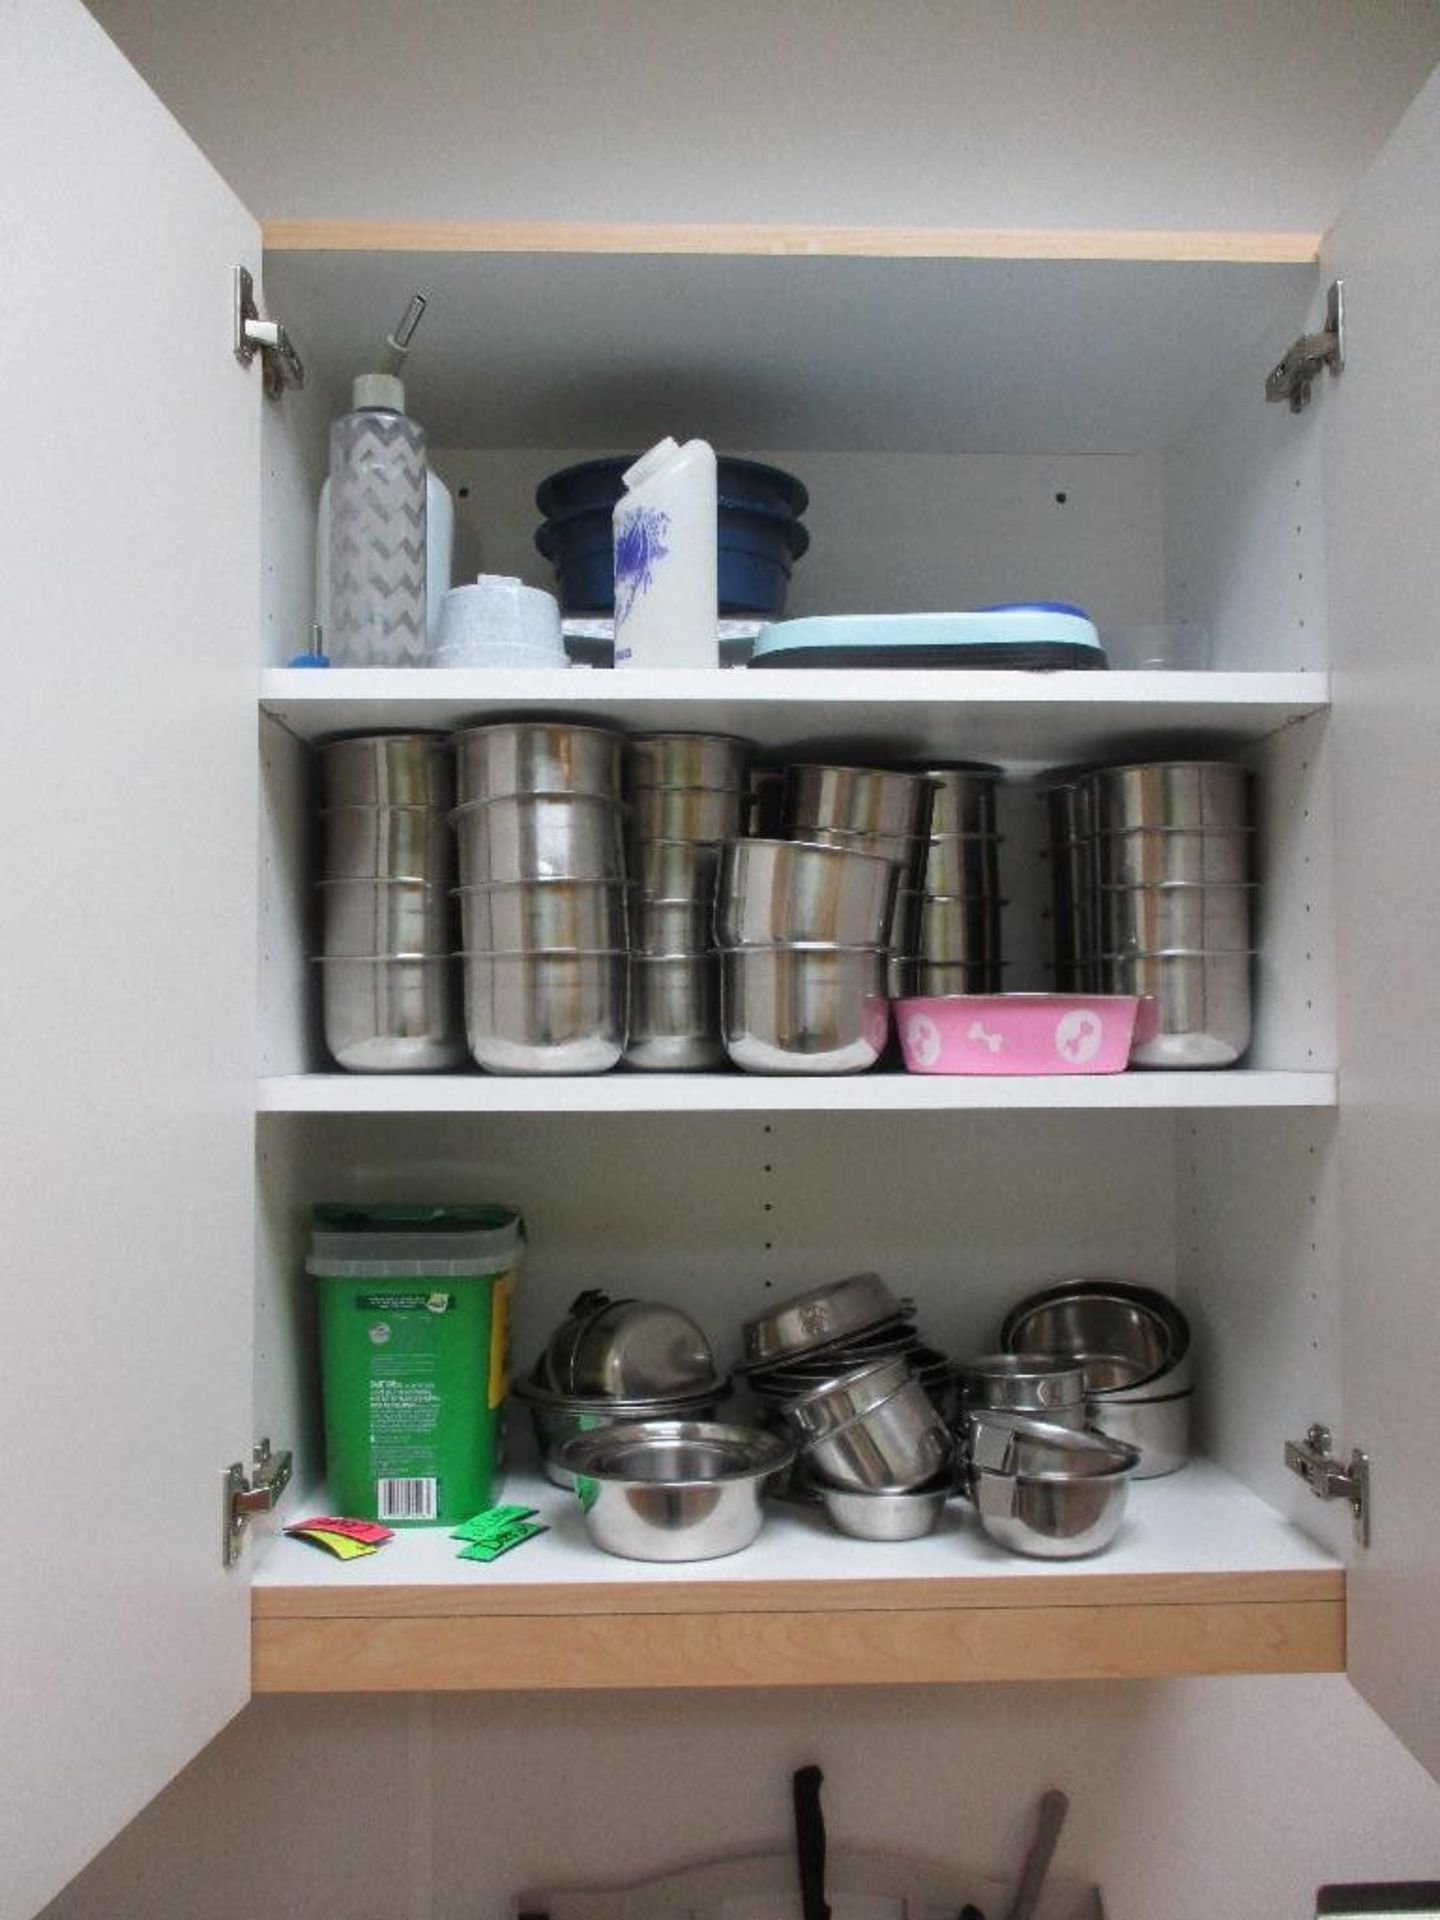 Contents of all cabinets and counters in this area and Large sink( disconnect water and cap to code) - Image 14 of 15